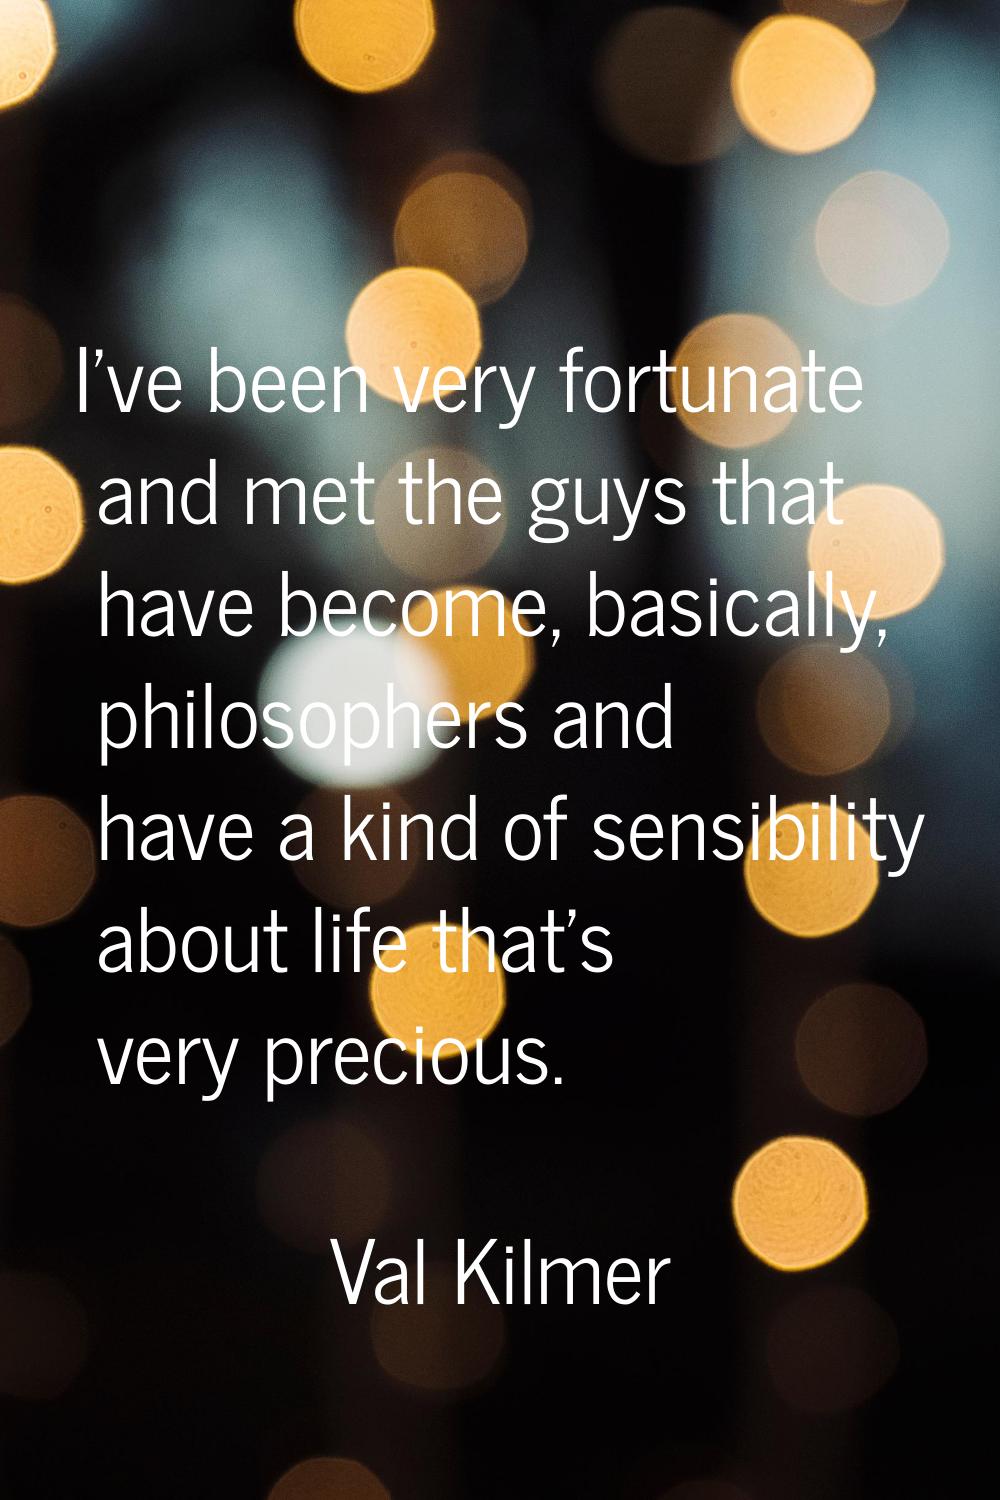 I've been very fortunate and met the guys that have become, basically, philosophers and have a kind